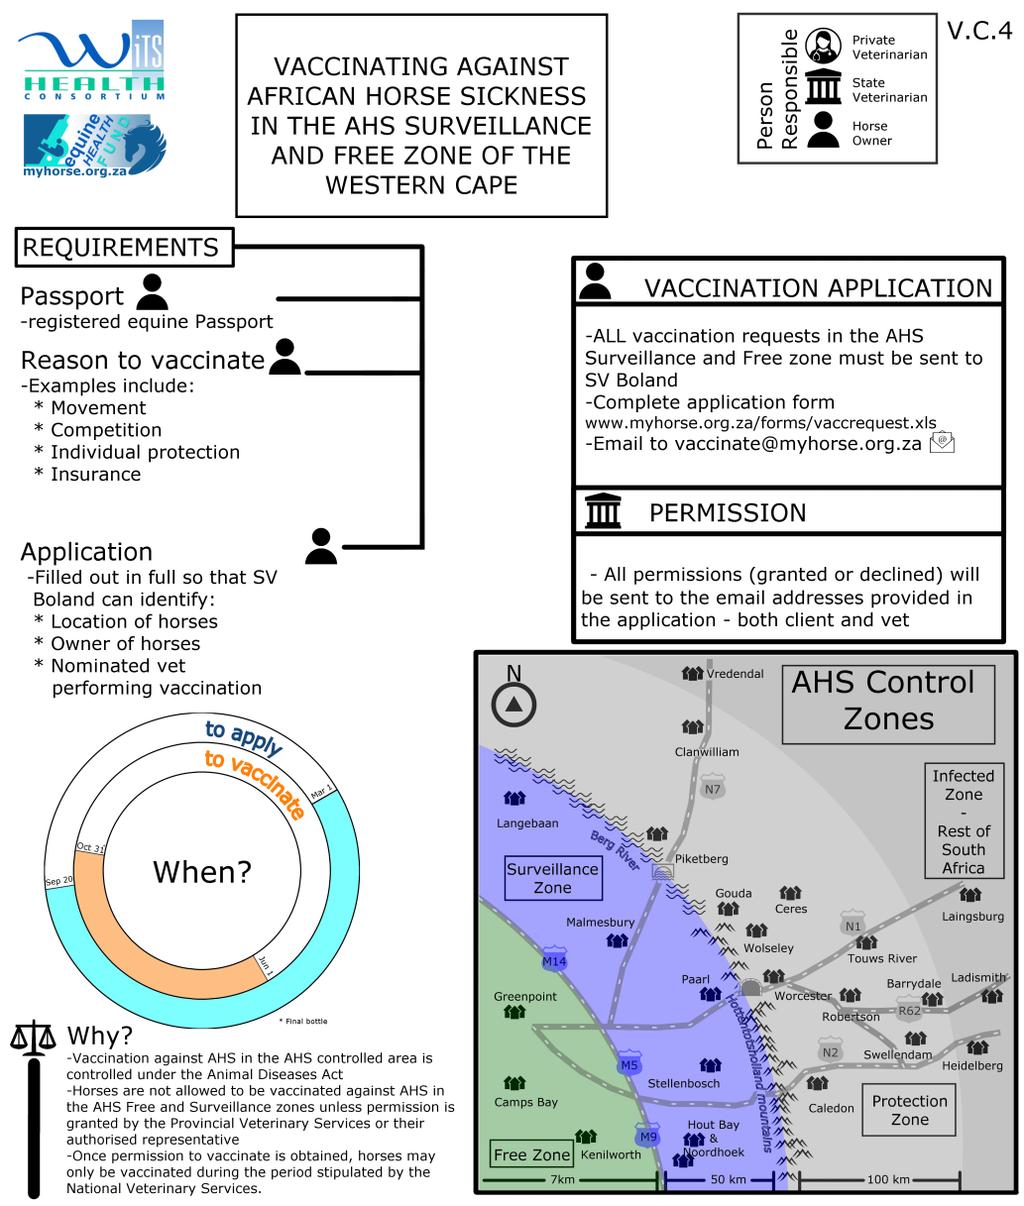 Process Figure 1 illustrates the vaccination permissions process where application for individual horses is made to State Vet Boland who issues permissions on behalf of the Chief Director for